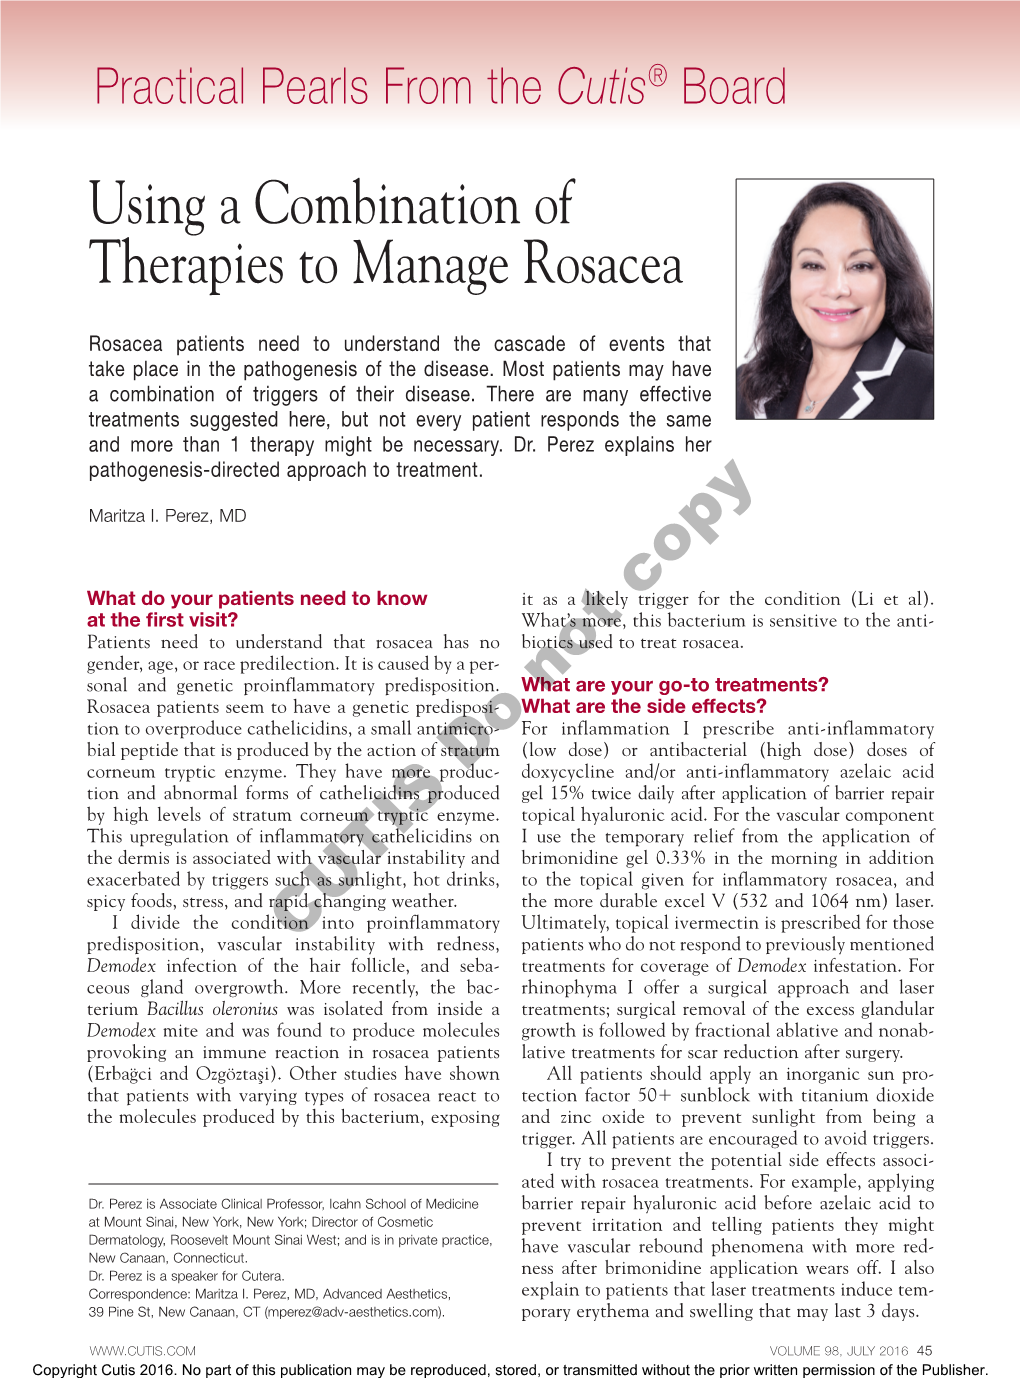 Using a Combination of Therapies to Manage Rosacea